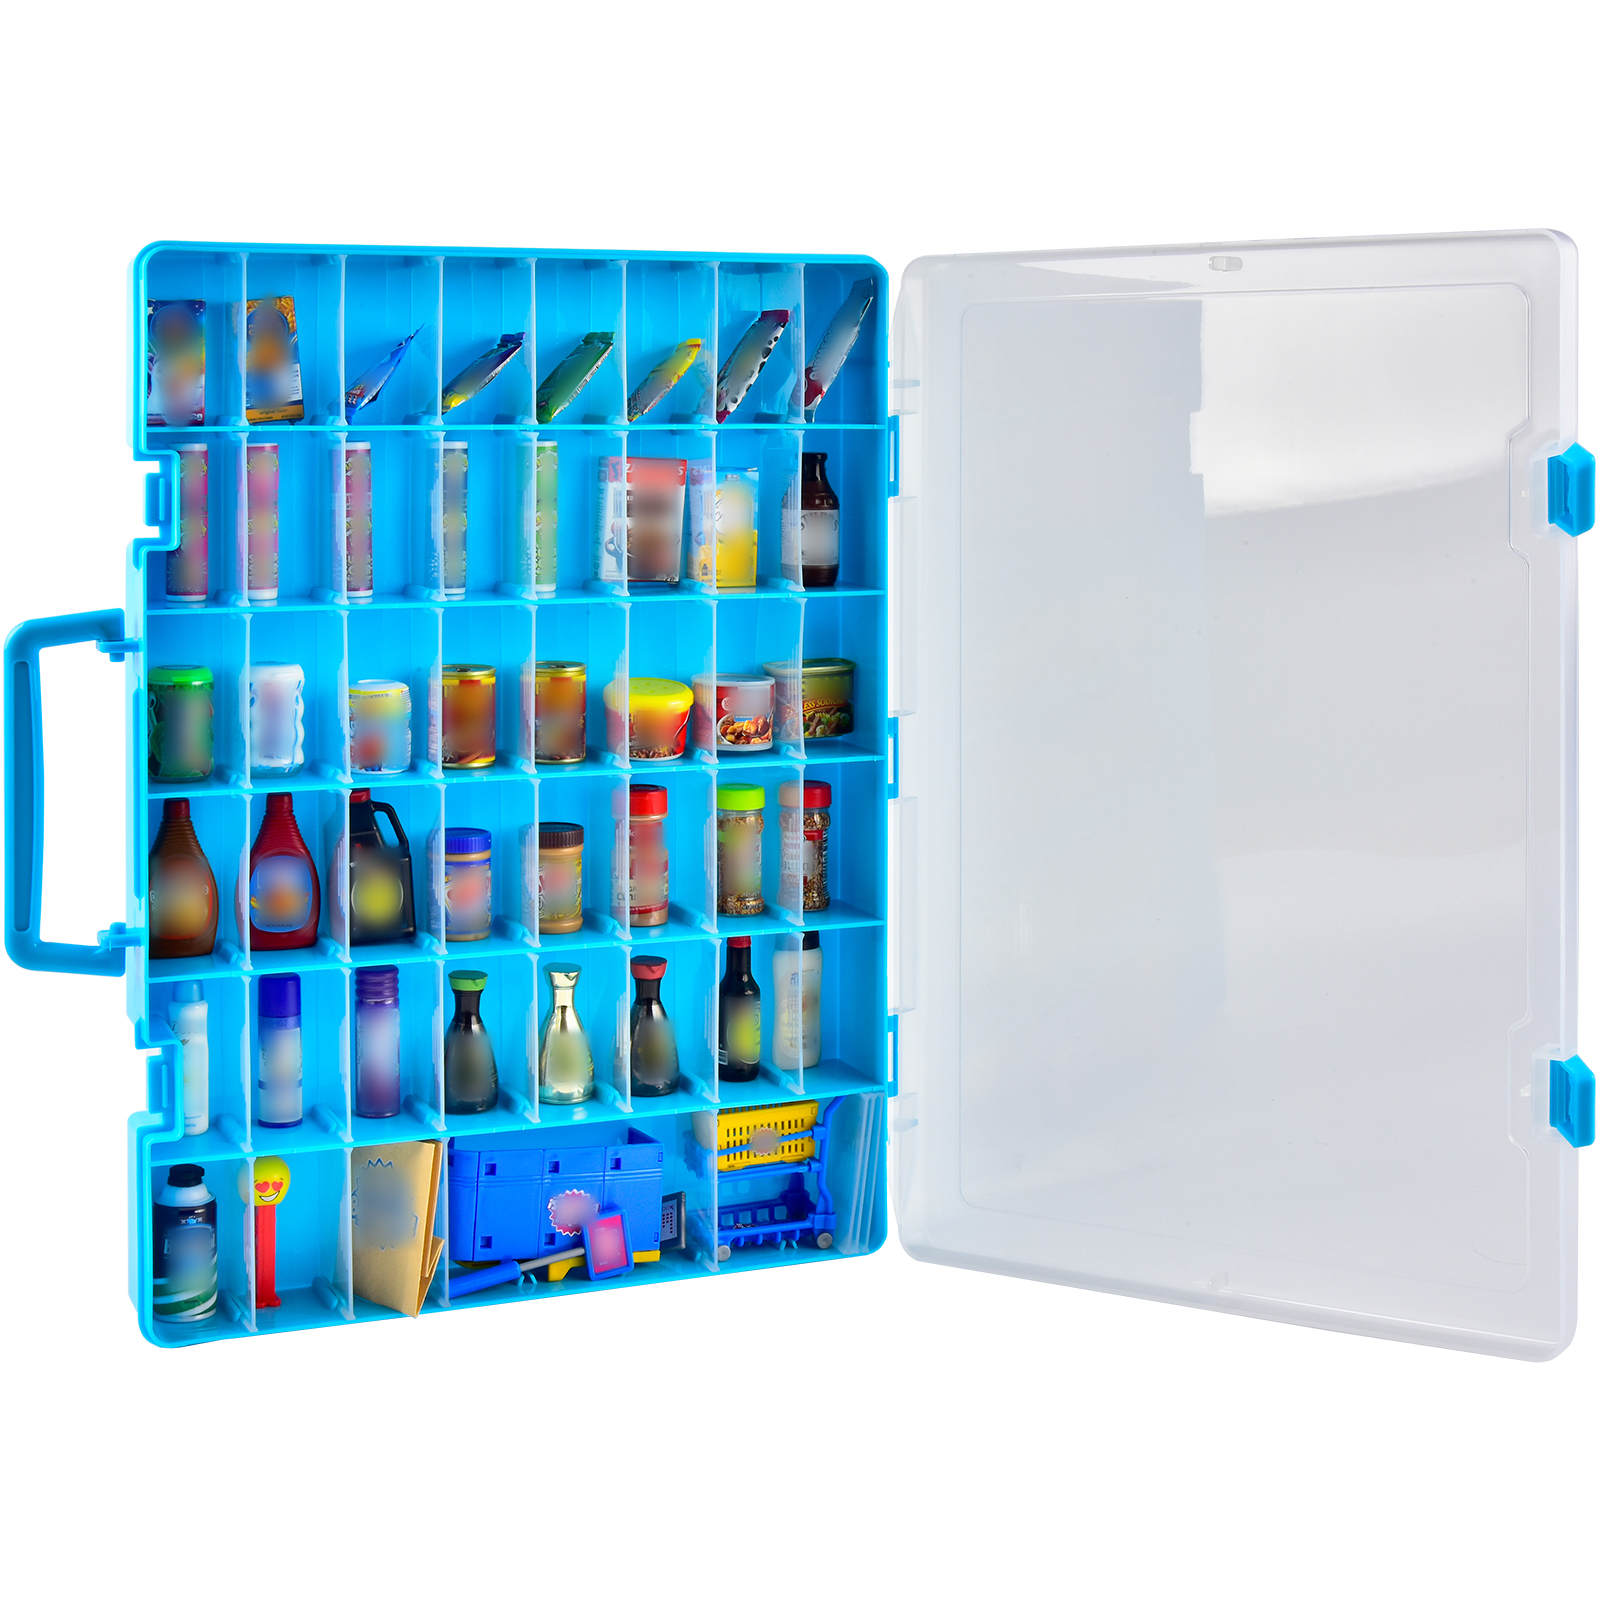 Case for Mini Brands Toys Series 1 2 3 Mystery Capsule Real Miniature  Collectible Kit, Storage Organizer Holder for Mini Mart Collection (Box  Only)